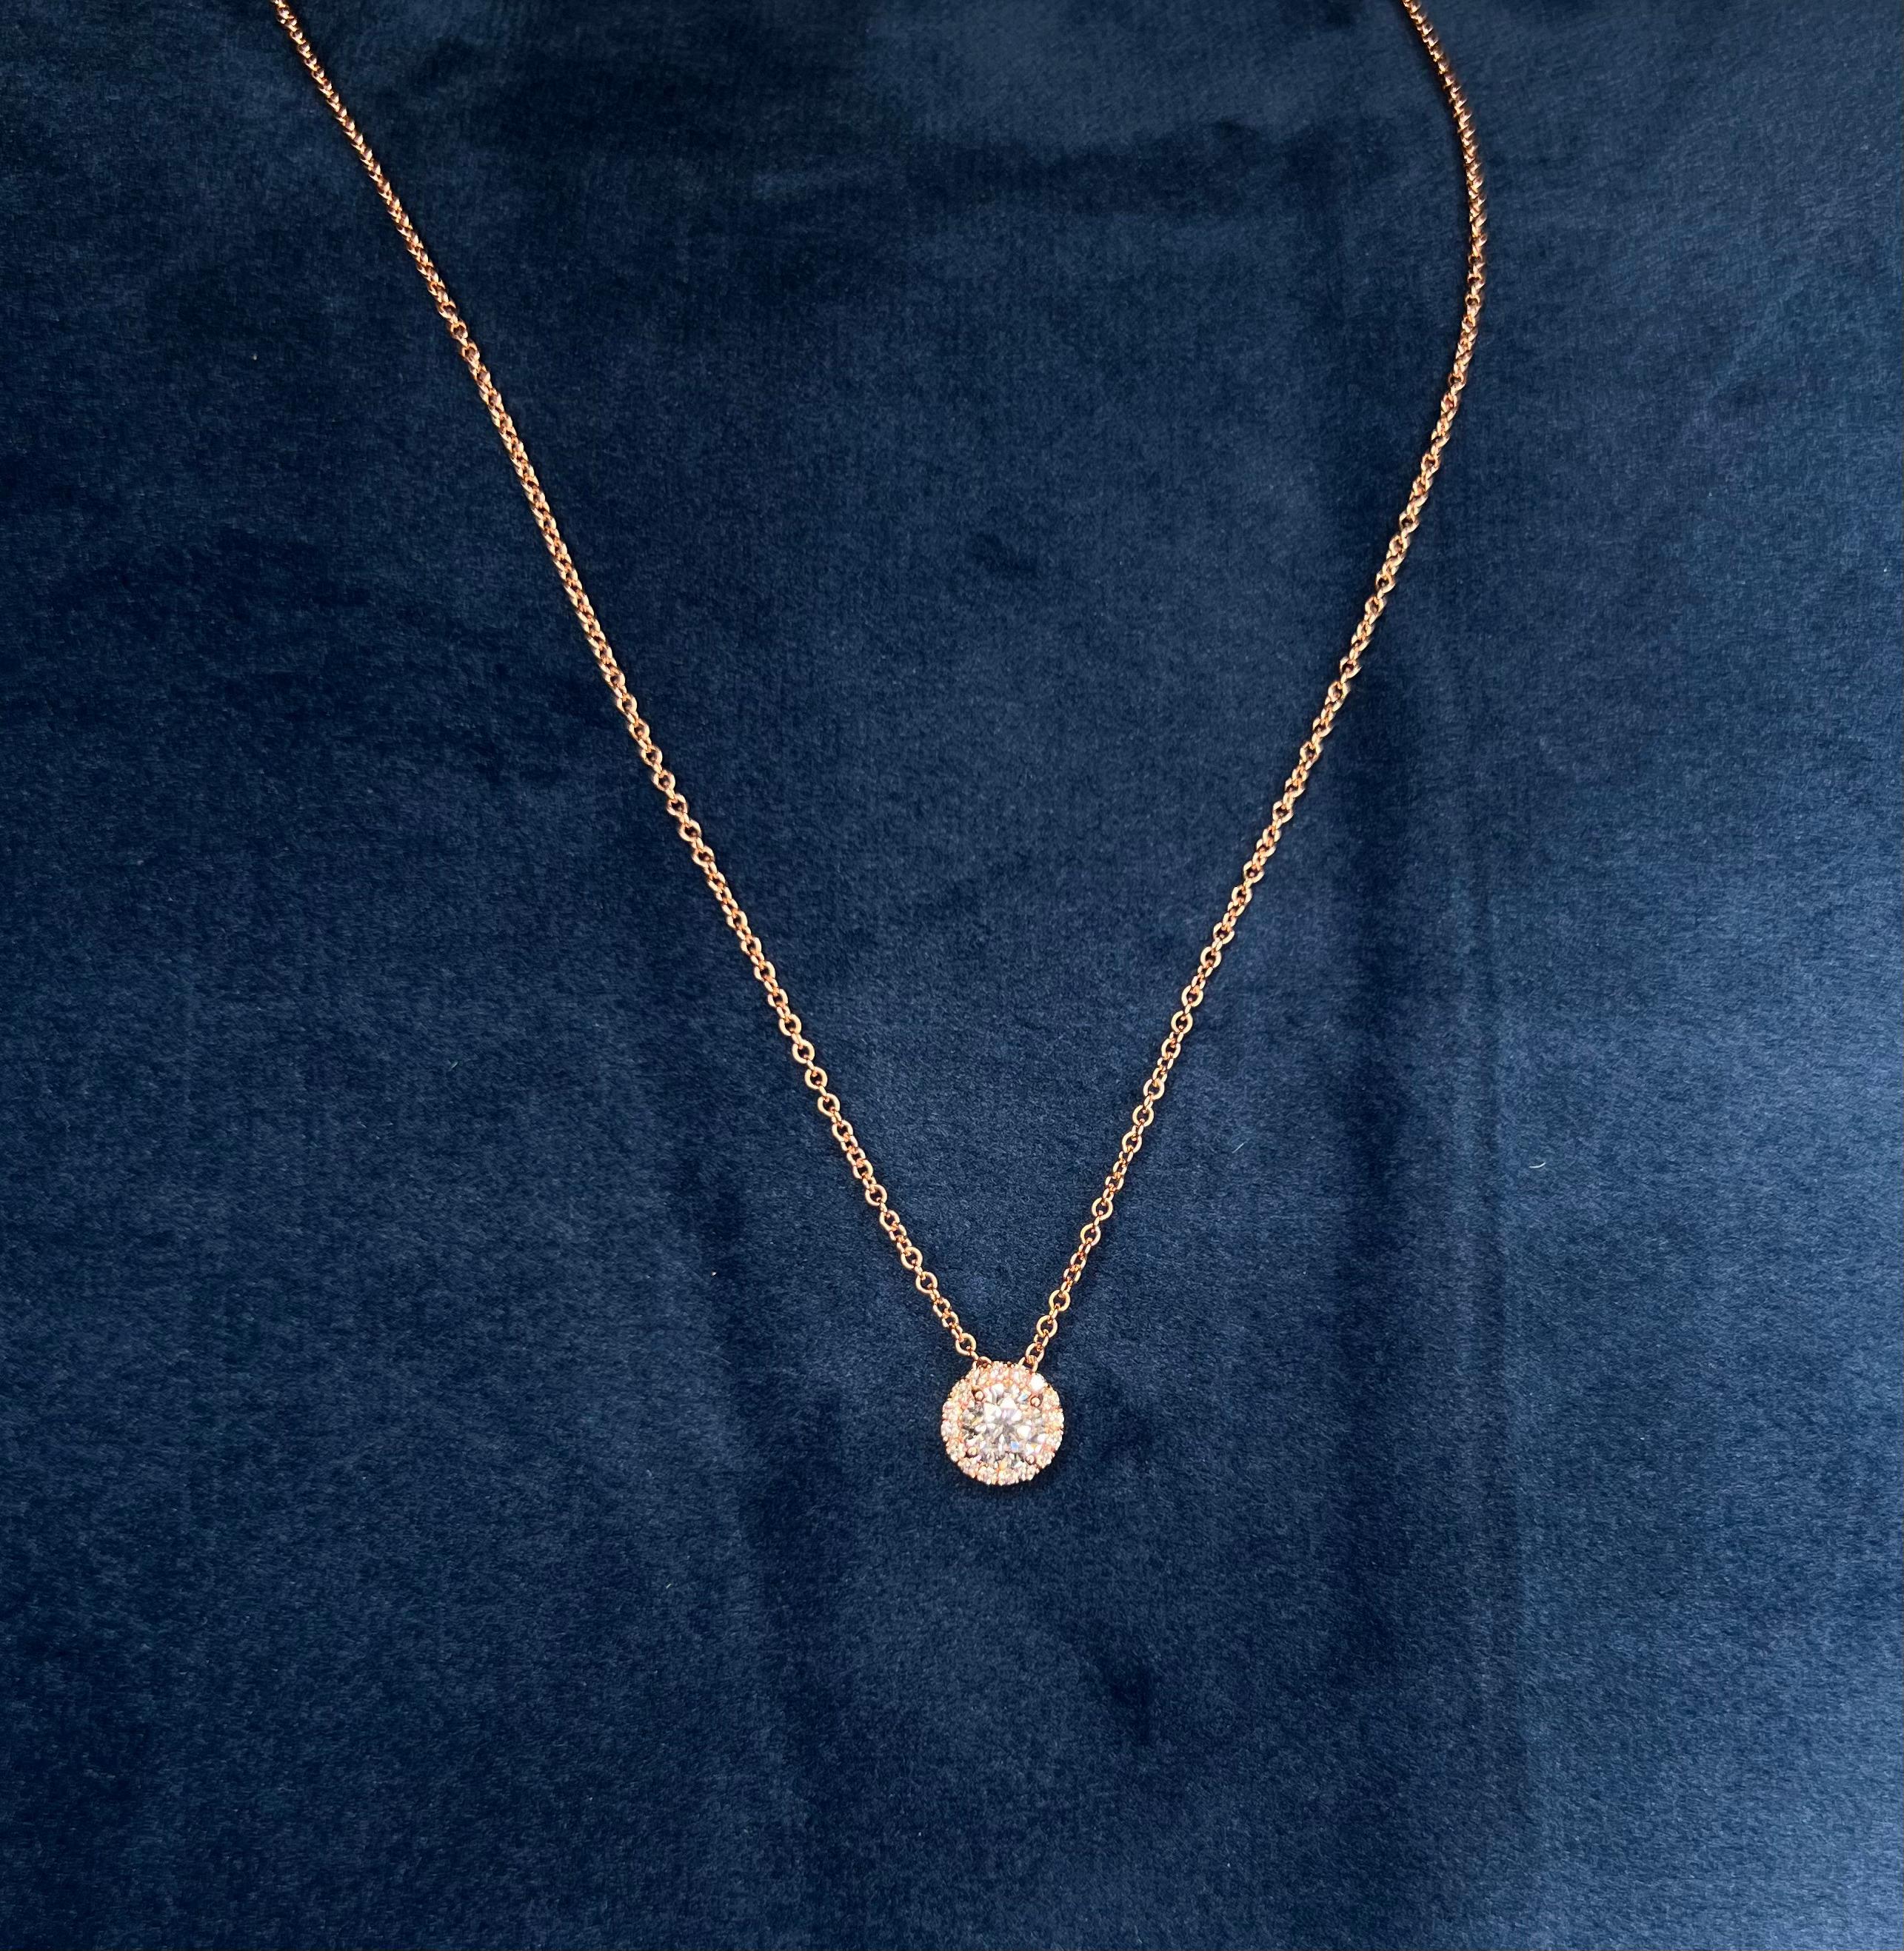 14k Yellow Gold 0.40 Carat Round Cut Diamond Solitaire Pendant Necklace In New Condition For Sale In Los Angeles, CA